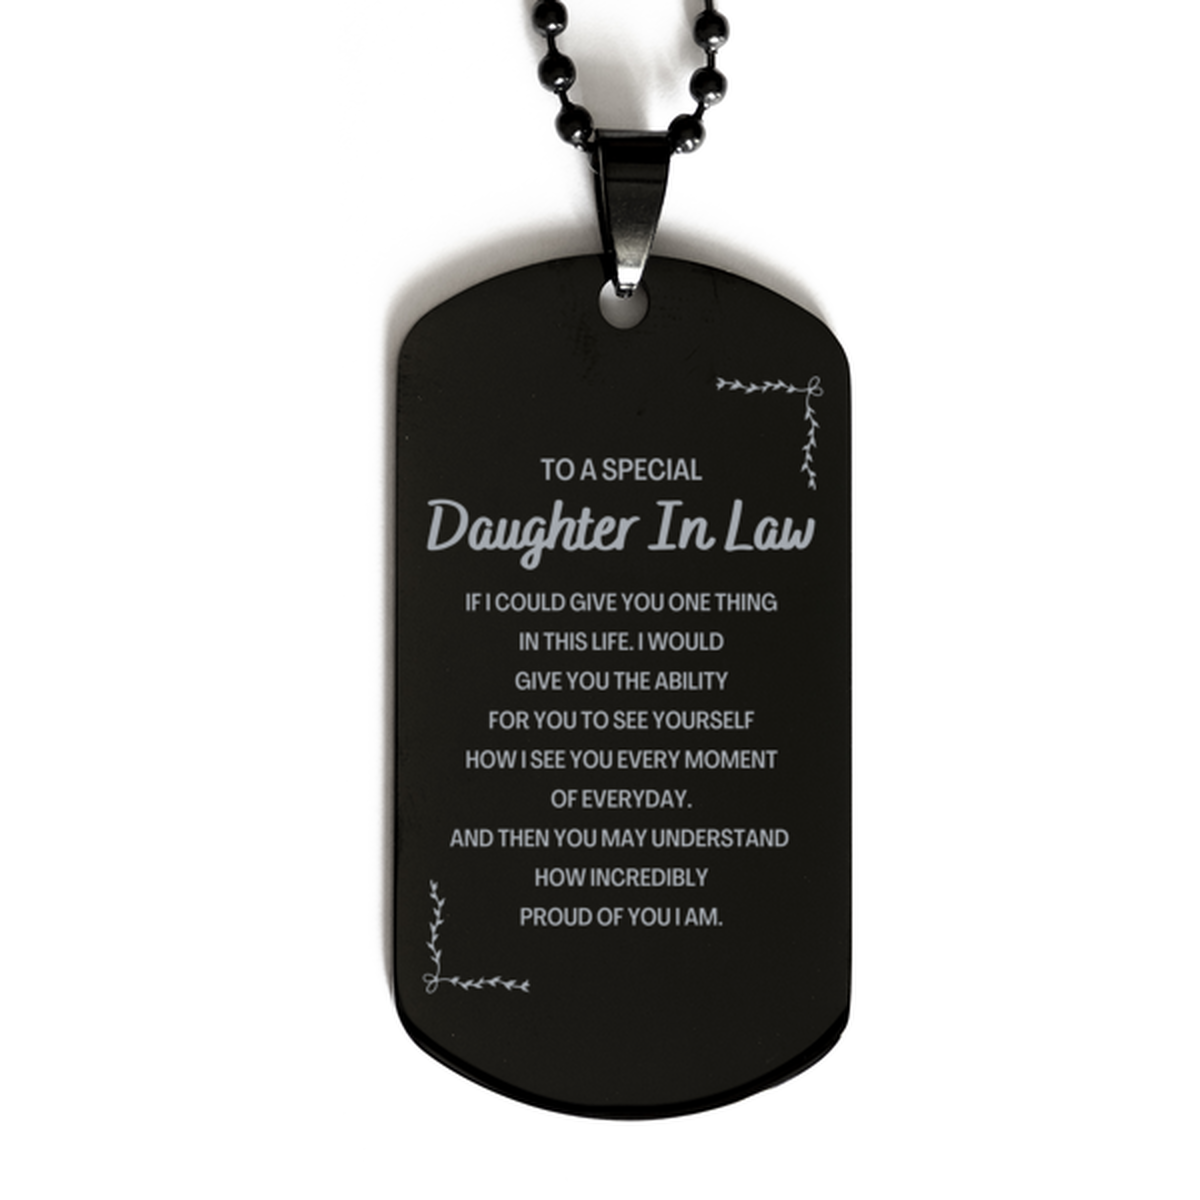 To My Daughter In Law Black Dog Tag, Gifts For Daughter In Law Engraved, Inspirational Gifts for Christmas Birthday, Epic Gifts for Daughter In Law To A Special Daughter In Law how incredibly proud of you I am